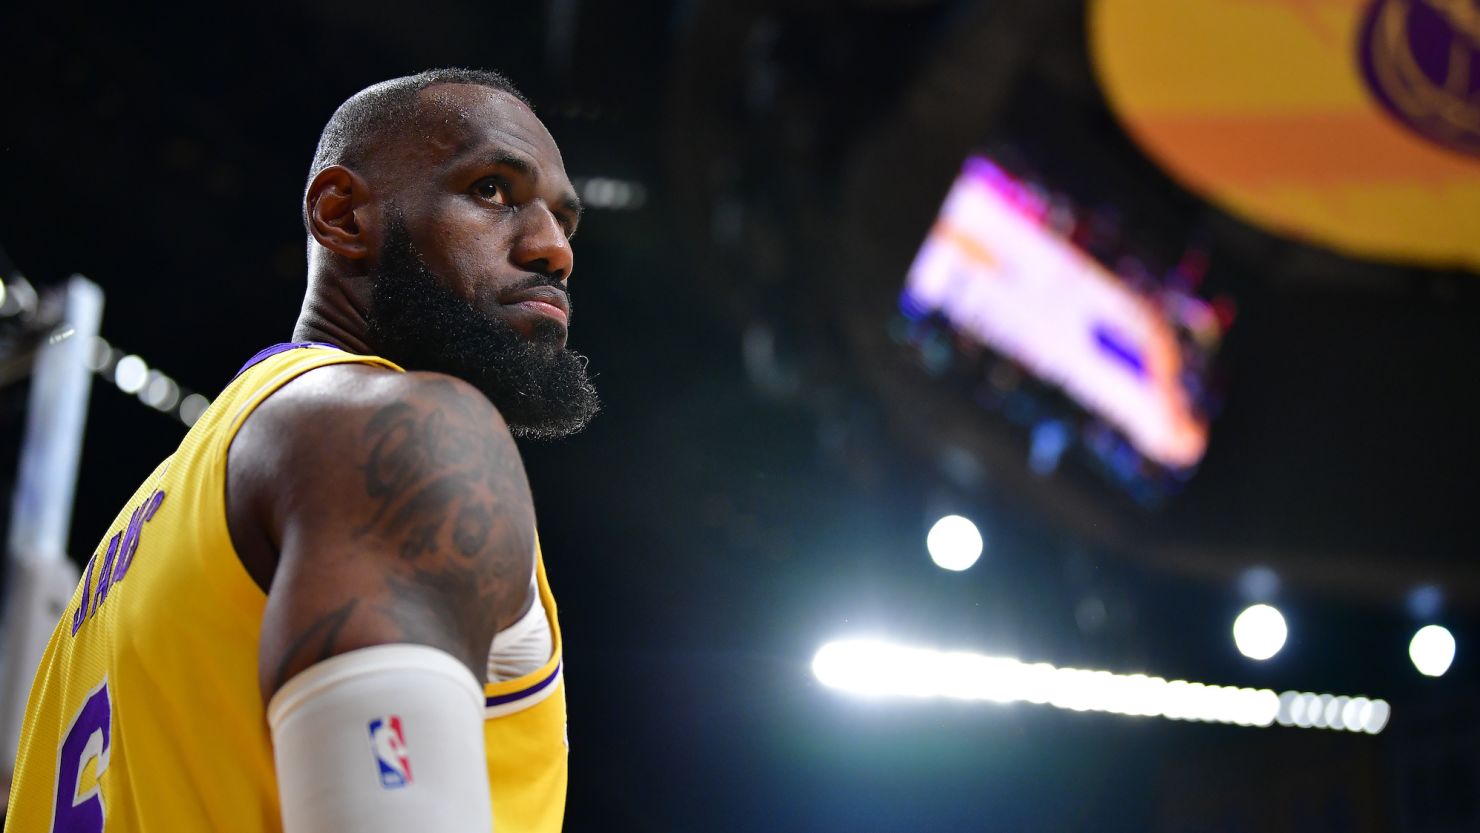 LeBron James has earned the right to decide his future, says LA Lakers general manager | CNN